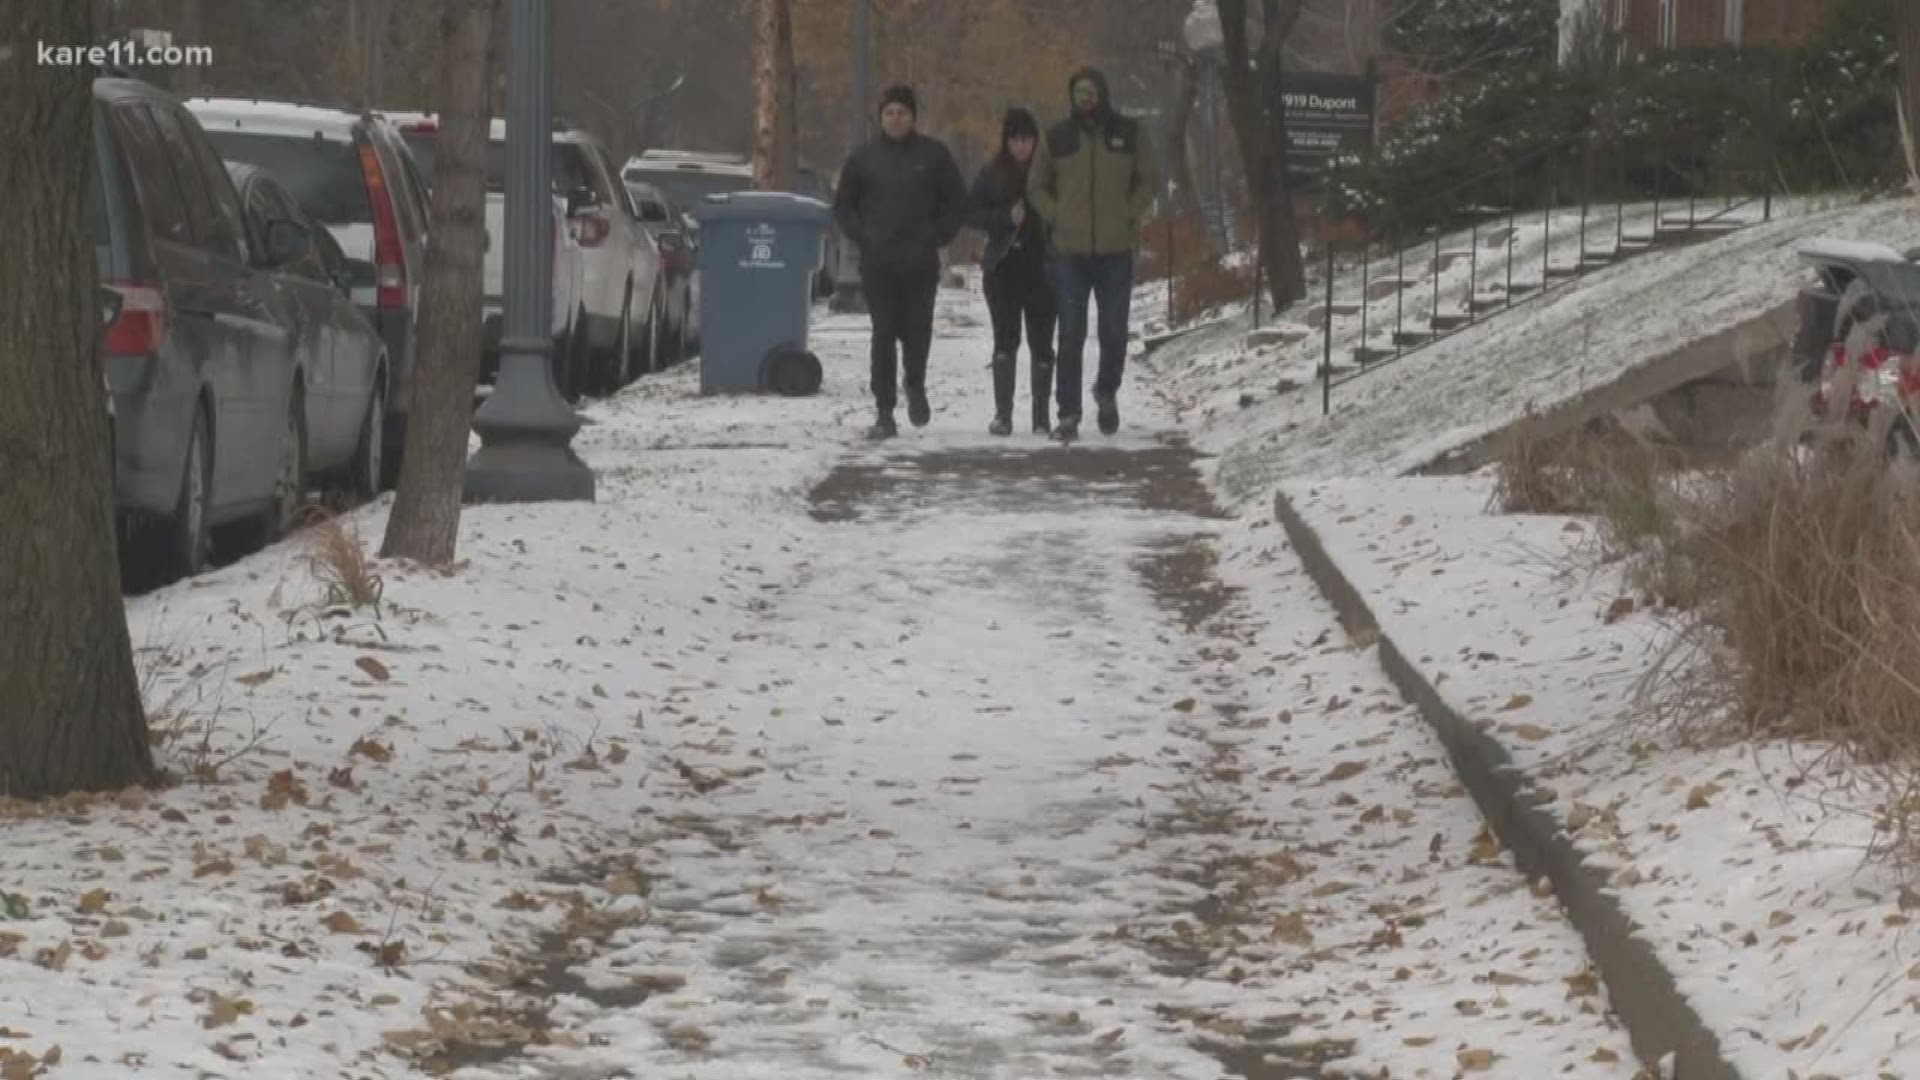 While the plows take care of the roads-- sidewalks are usually everyone else's responsibility. And Minneapolis wants to make sure you're getting out your shovels. John Croman explains why the city is getting tough on sidewalk shoveling.